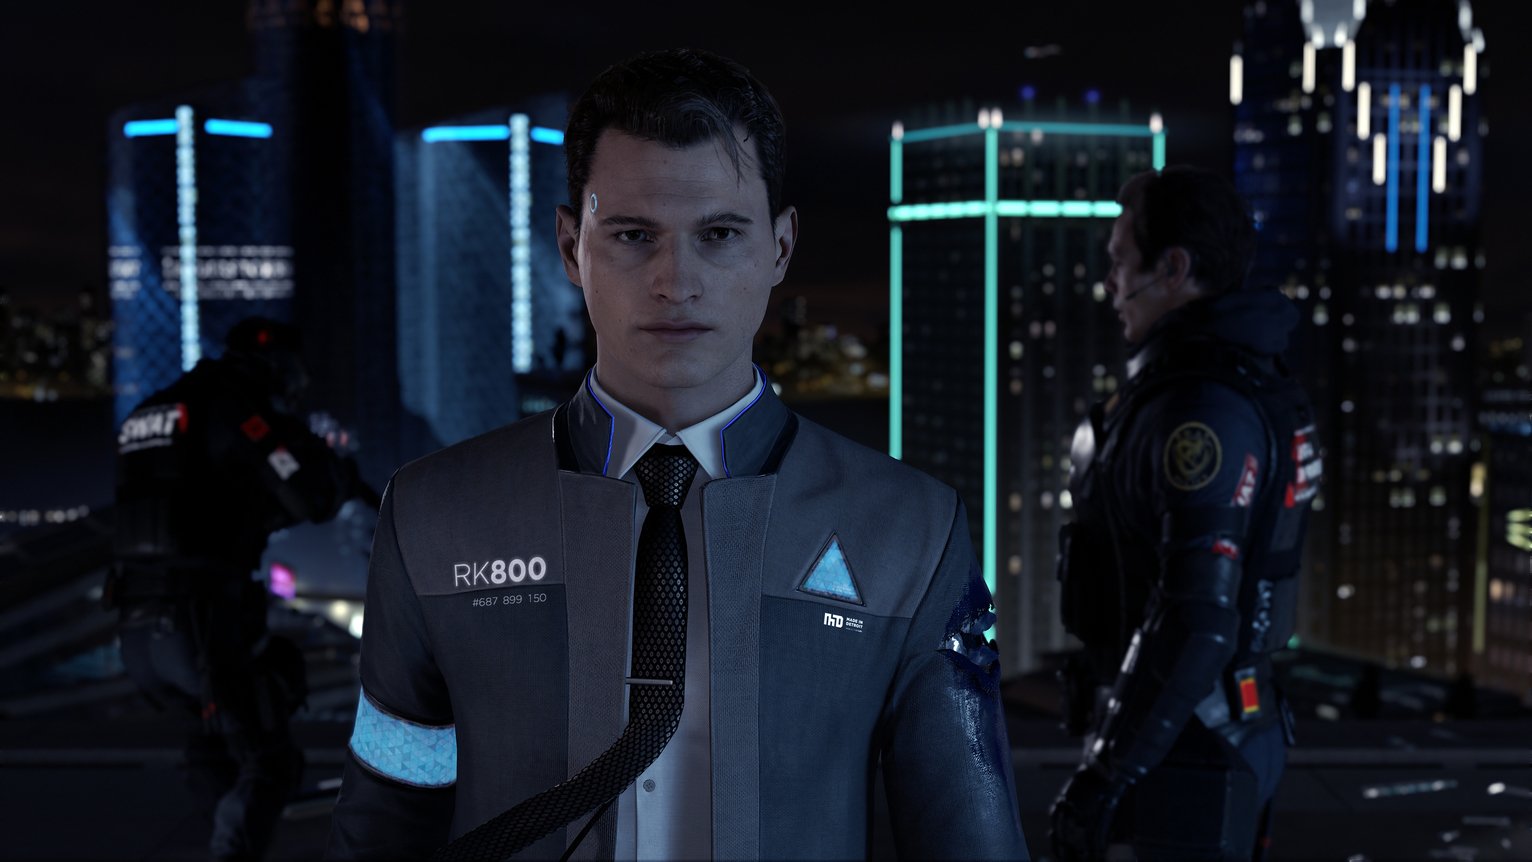 Detroit: Become Human PS4 Game Review